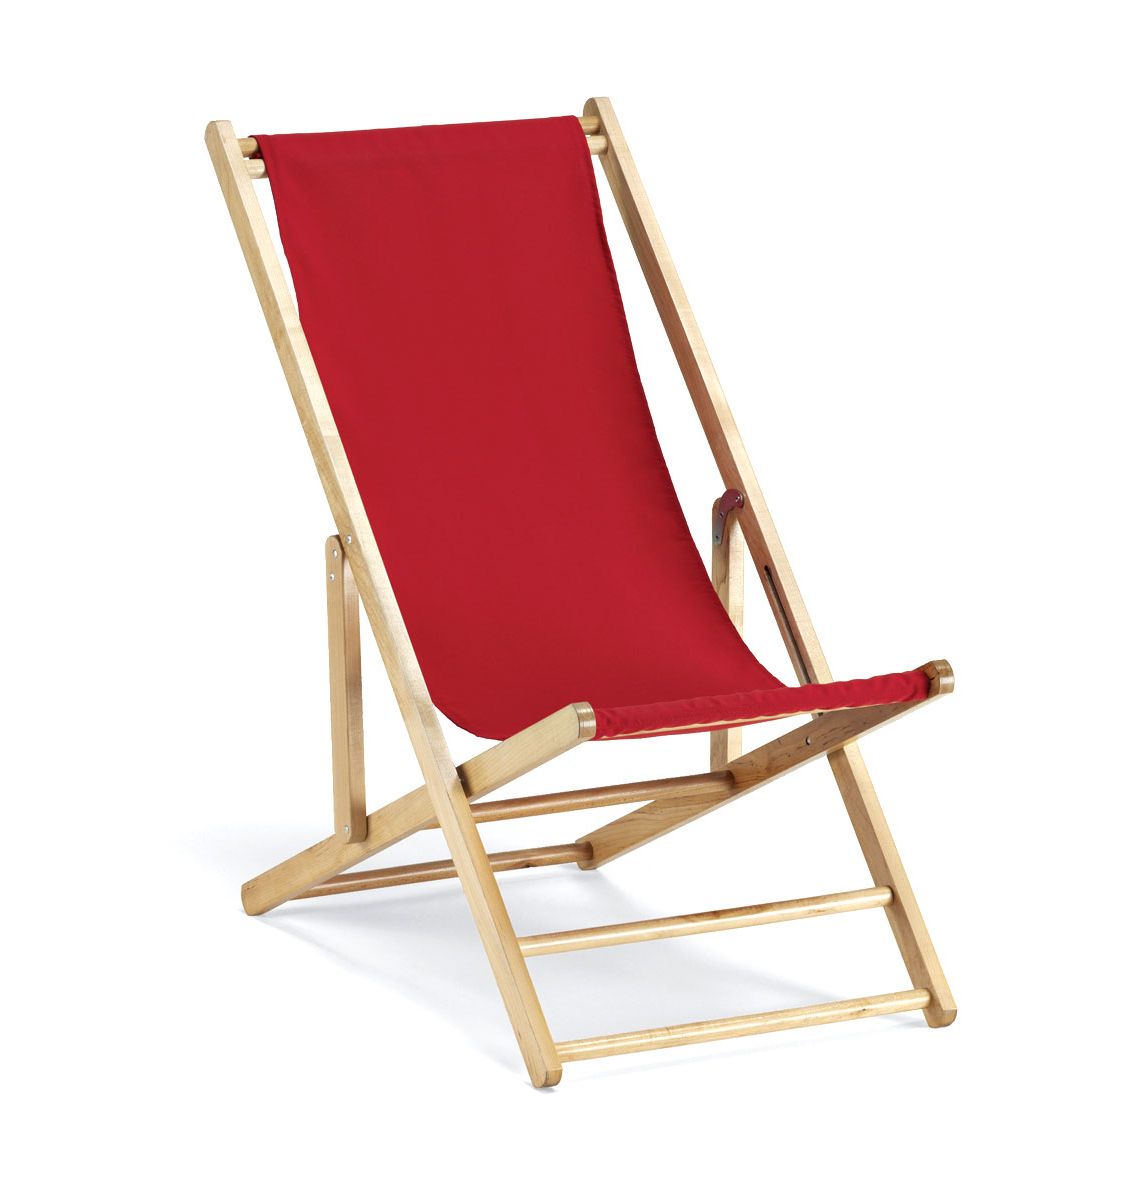 Reclining Sling Lounge Chairs Regarding 2019 Custom Size Sling Or Beach Chair Canvas Replacement Sling (View 20 of 25)